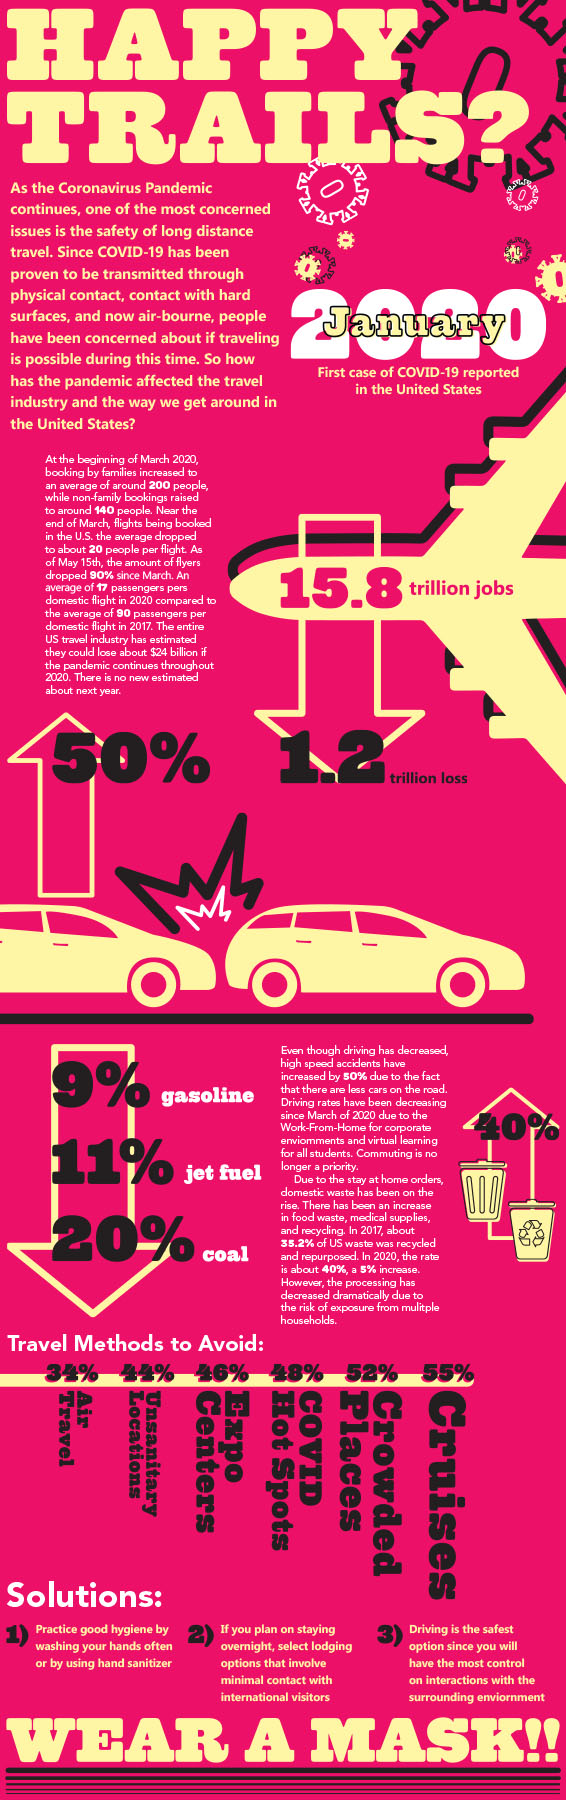 pink infographic about traveling during the pandemic